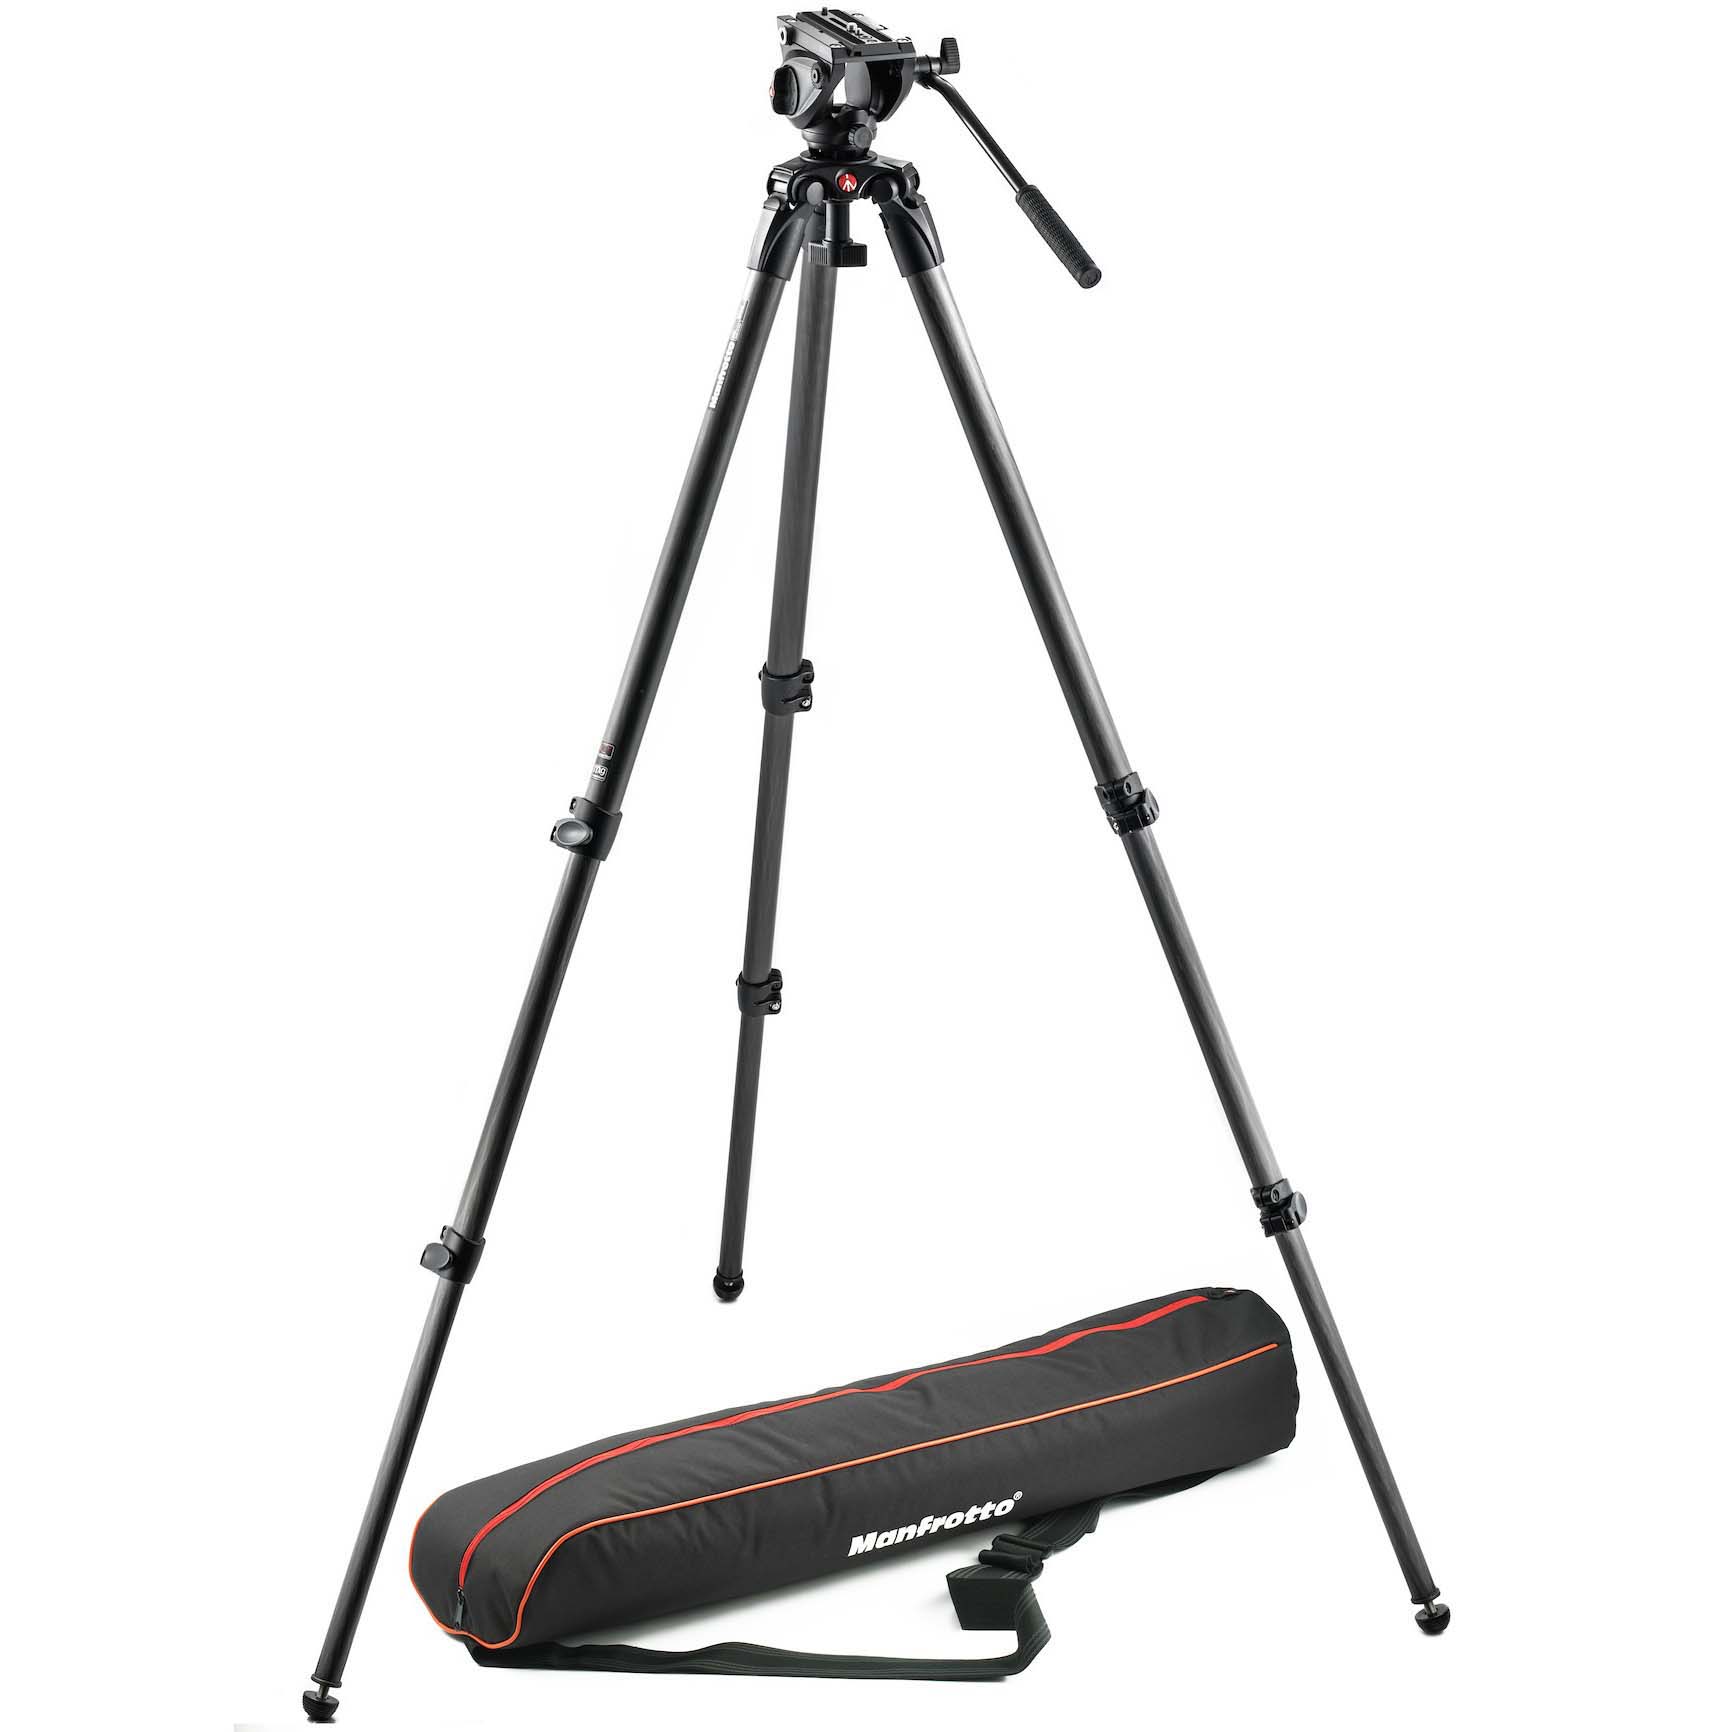 TRIPODE MANFROTTO MVK500C (TRIP CARB MPRO535 + ROT MVH500A) MANFROTTO 